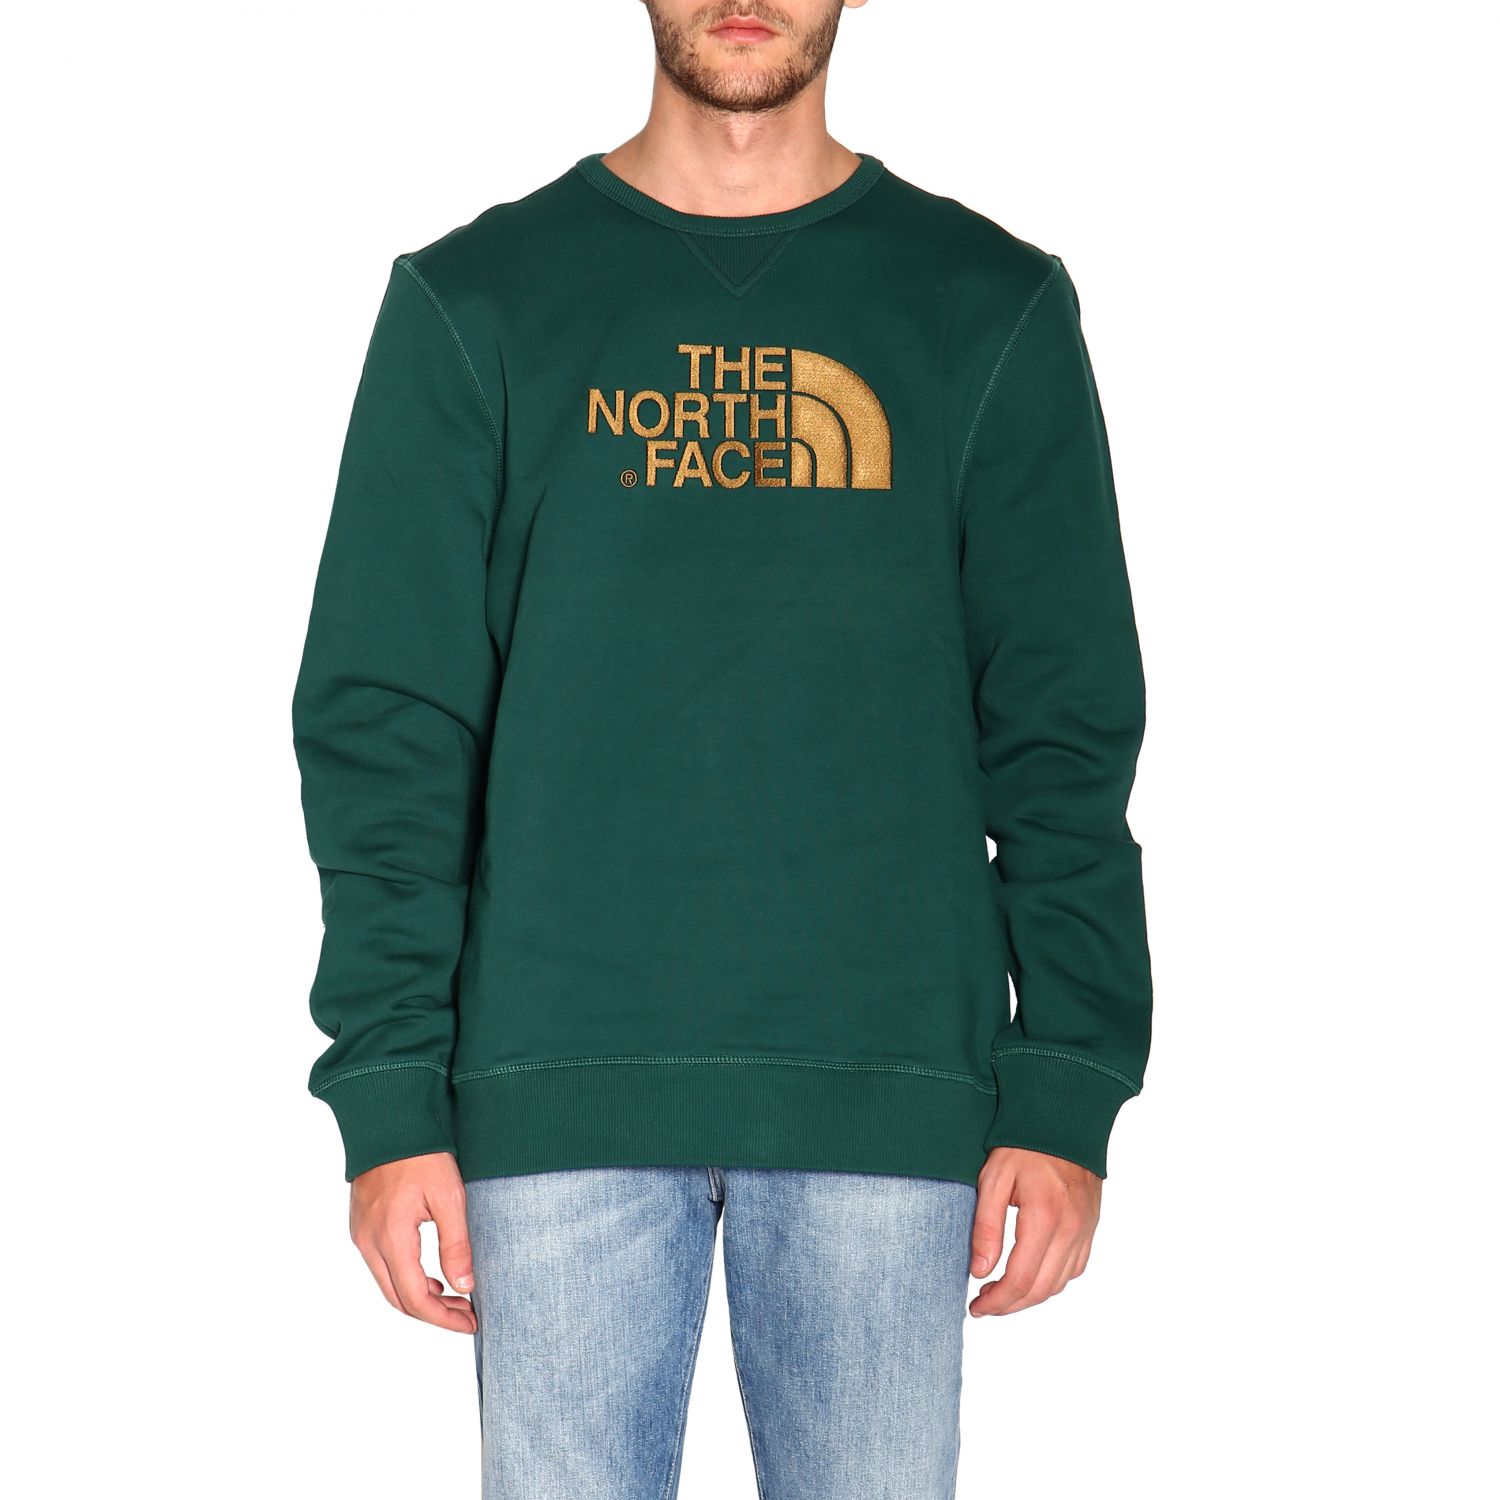 The North Face Outlet: Sweater men 